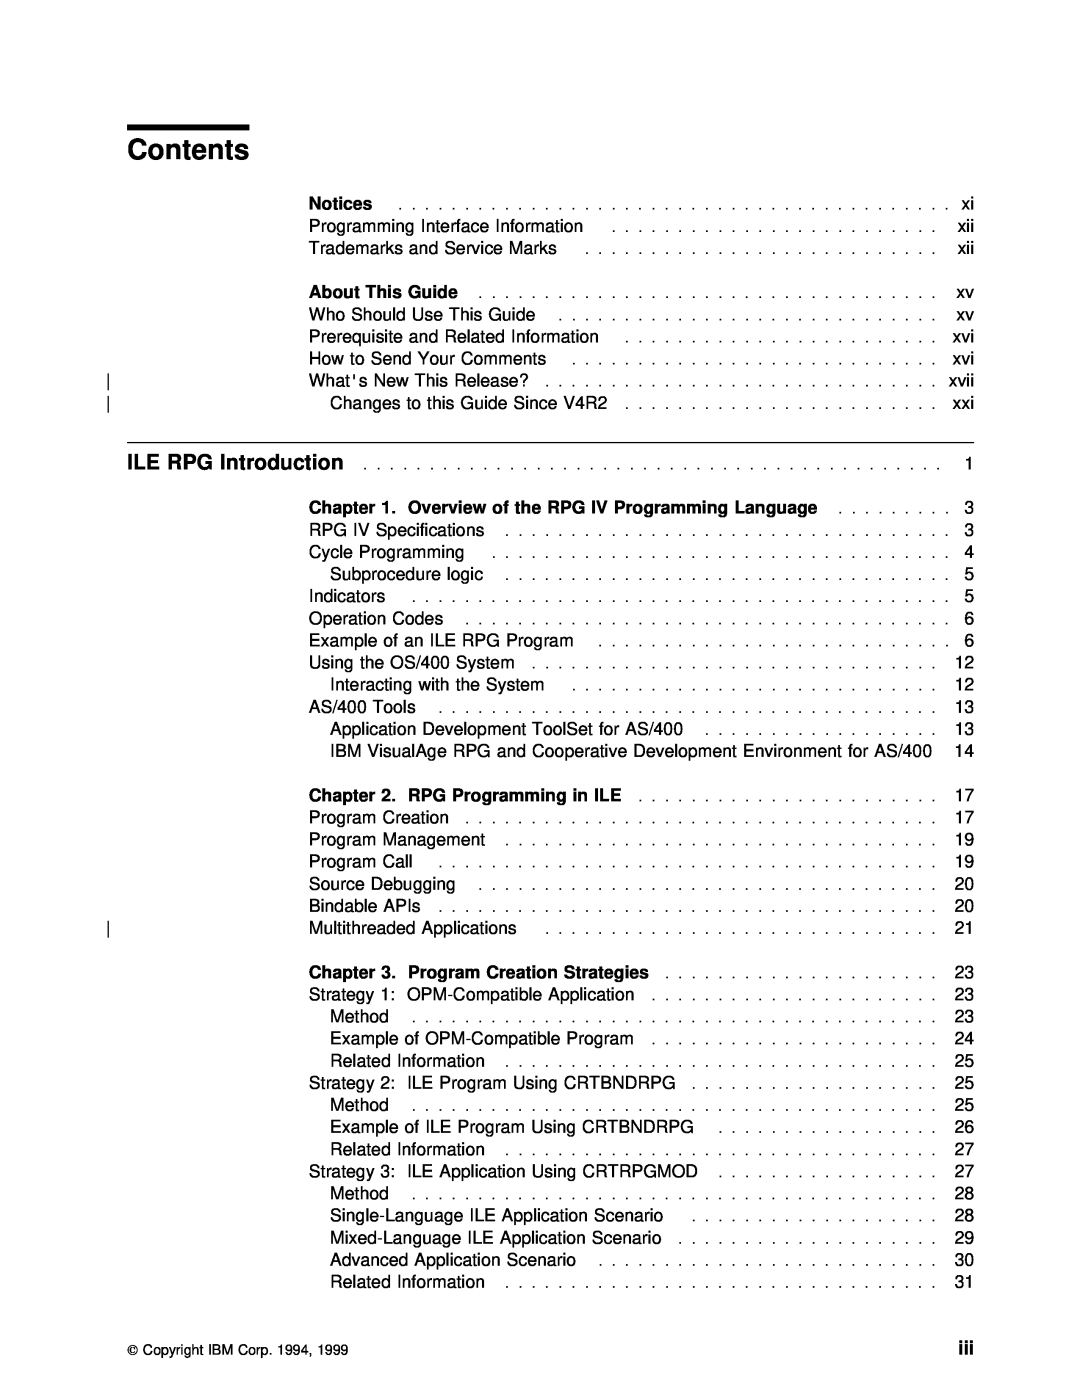 IBM AS/400 manual Contents, RPG Introduction 